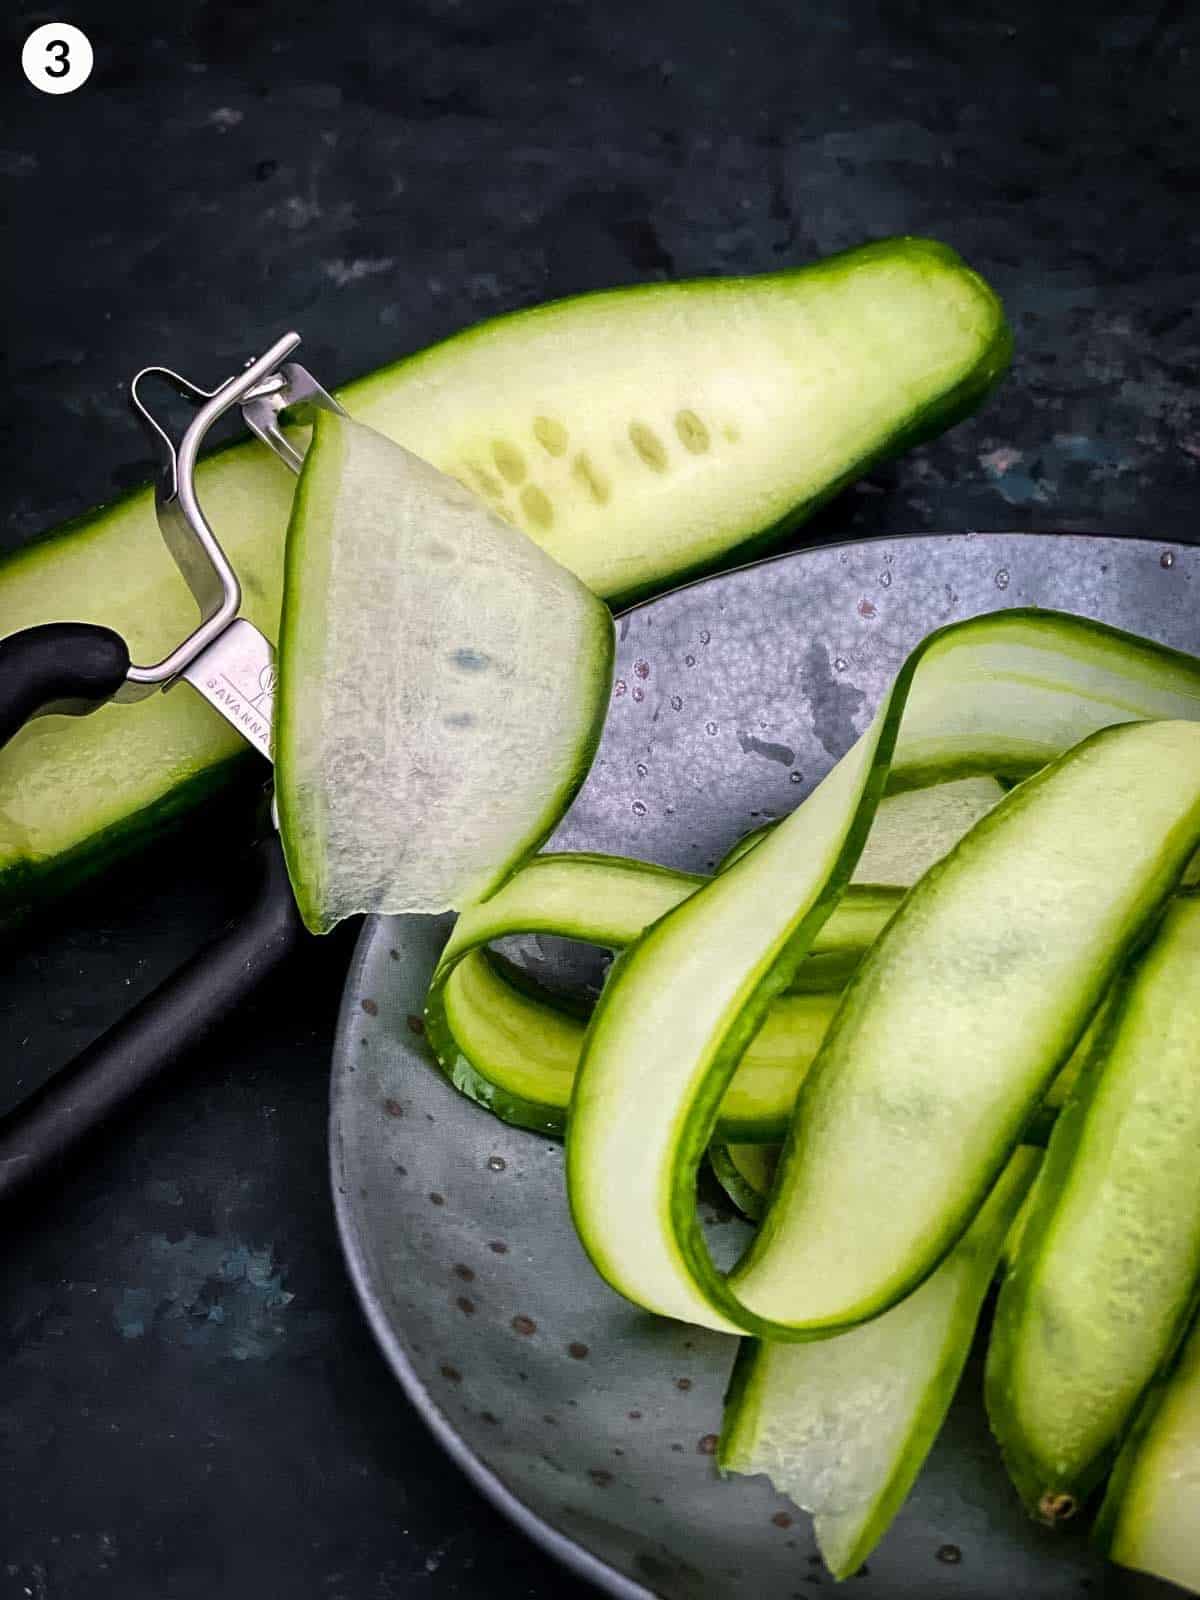 a peeler, peeling side ribbons of cucumber on a grey plate